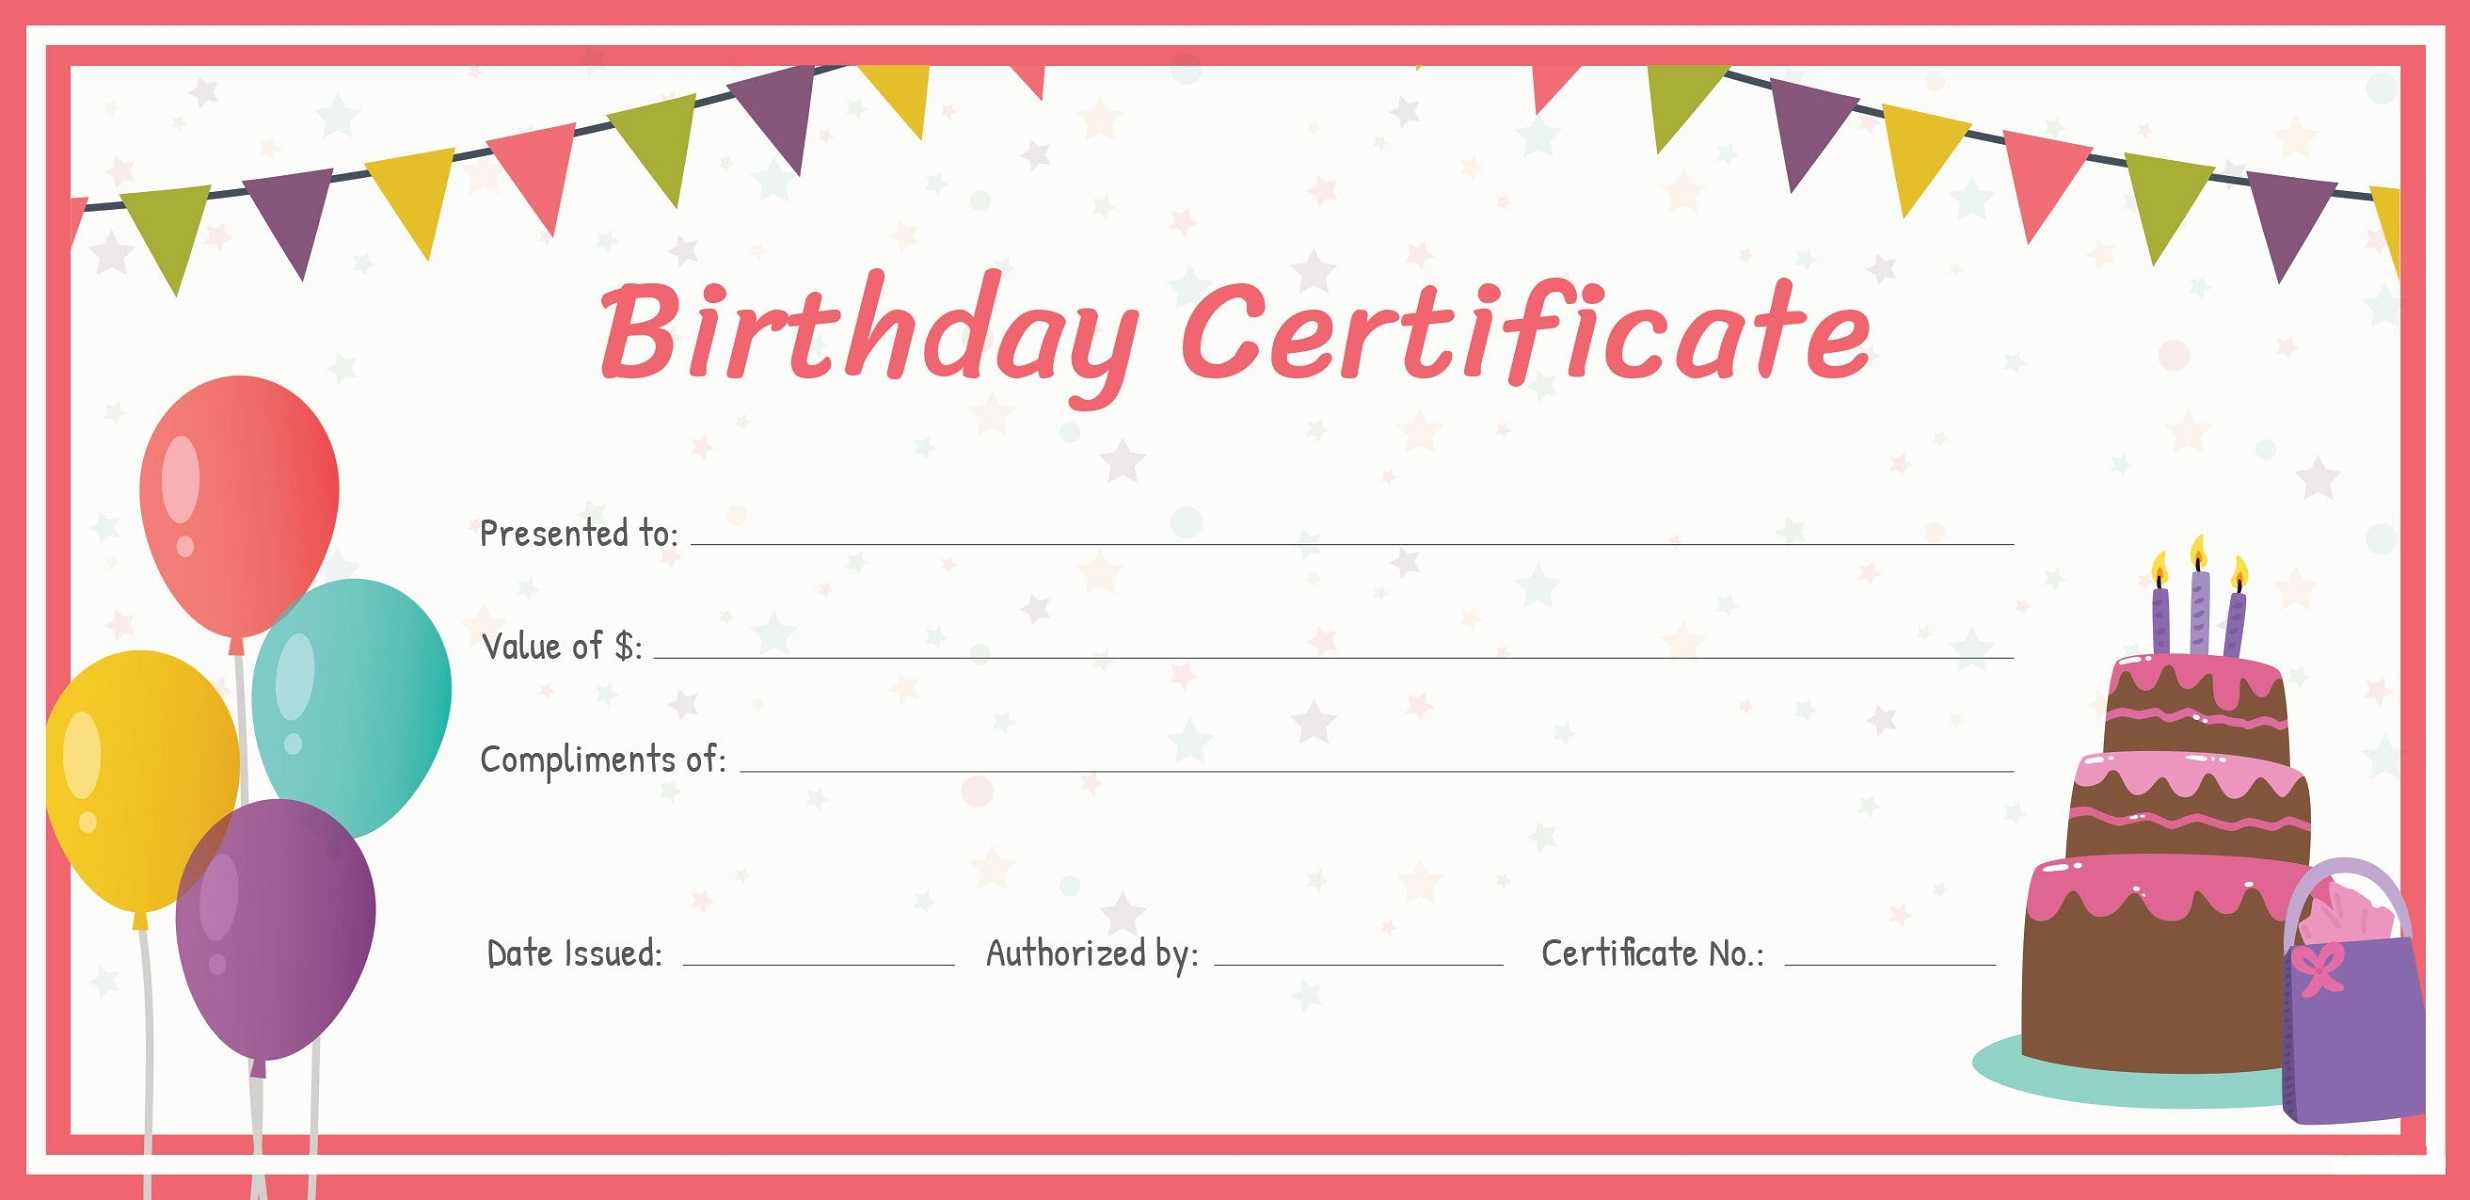 Gift Certificate Templates To Print For Free | 101 Activity Pertaining To Printable Gift Certificates Templates Free